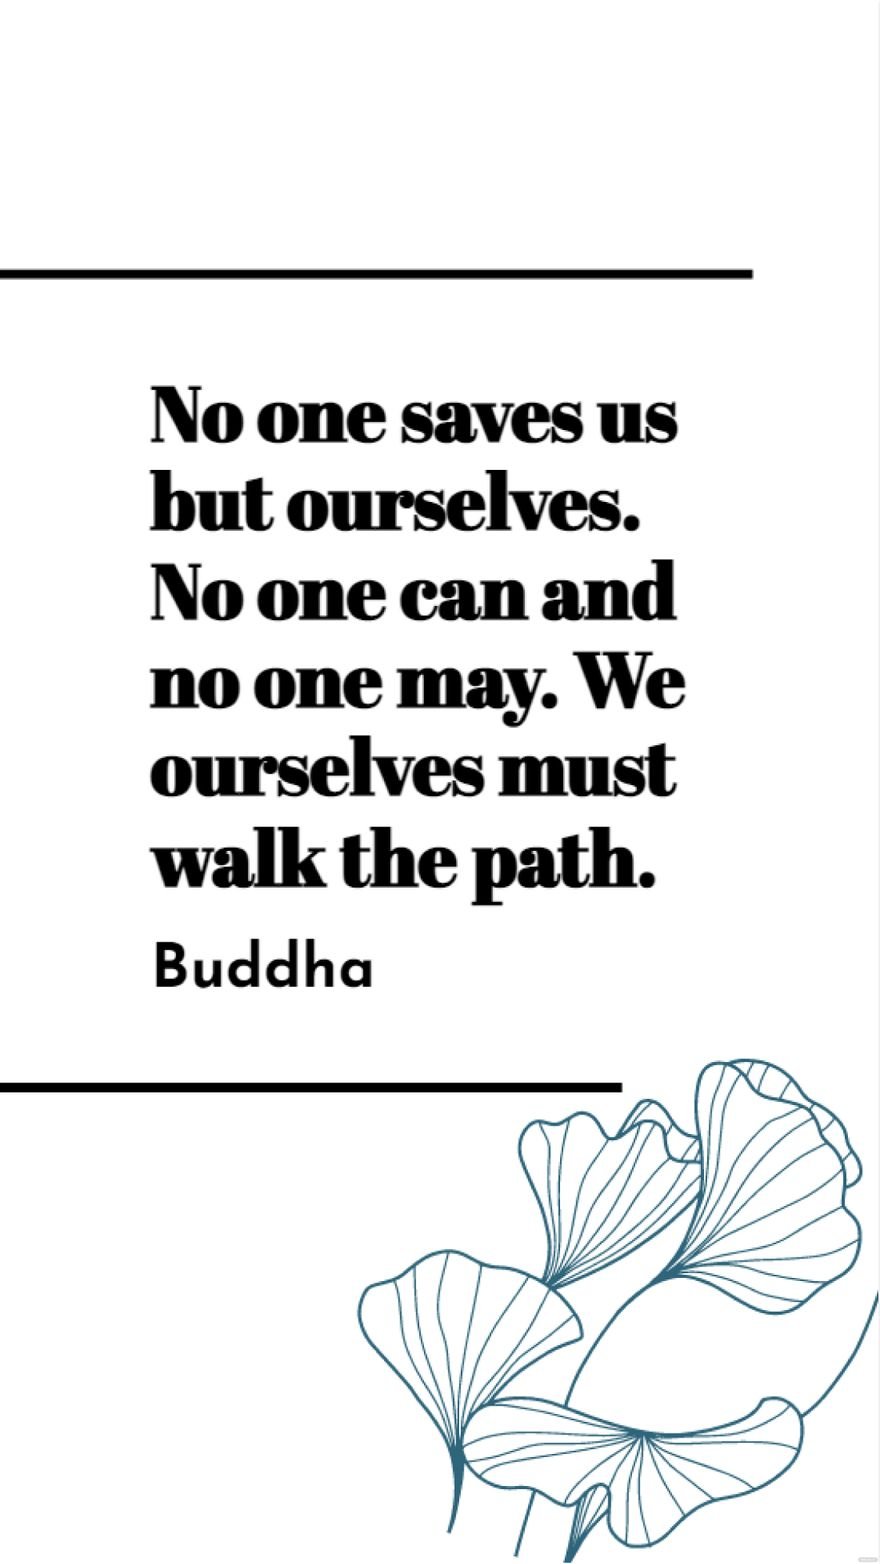 Buddha - No one saves us but ourselves. No one can and no one may. We ourselves must walk the path.